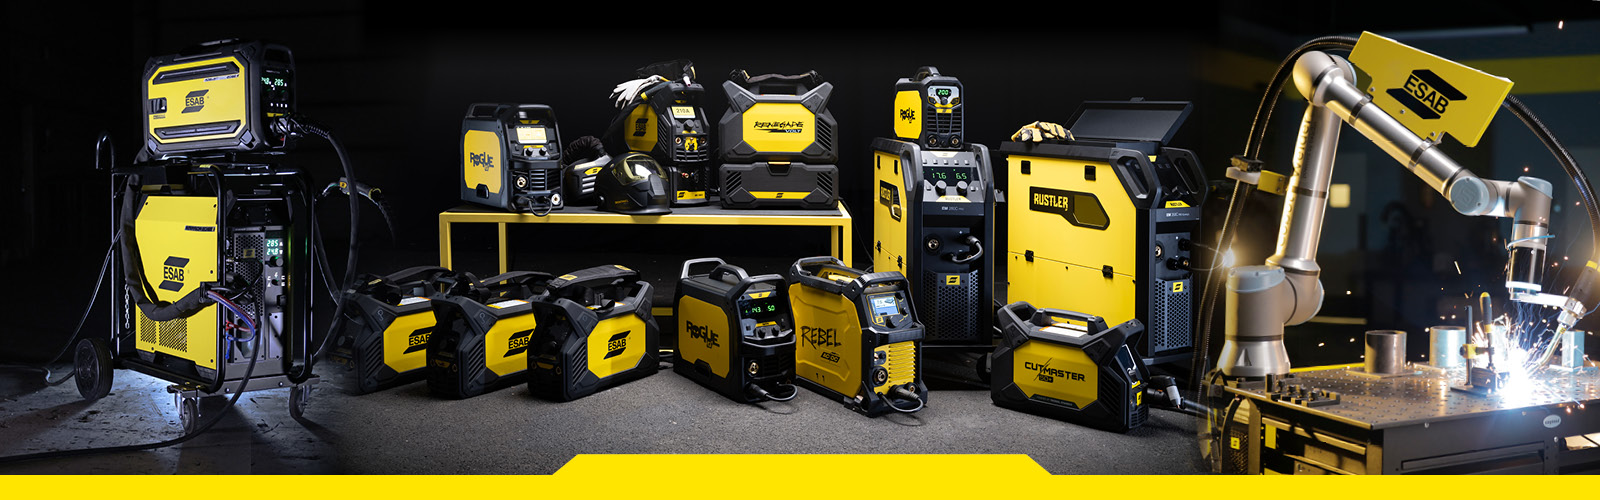 Various ESAB welding machines together with Cobot